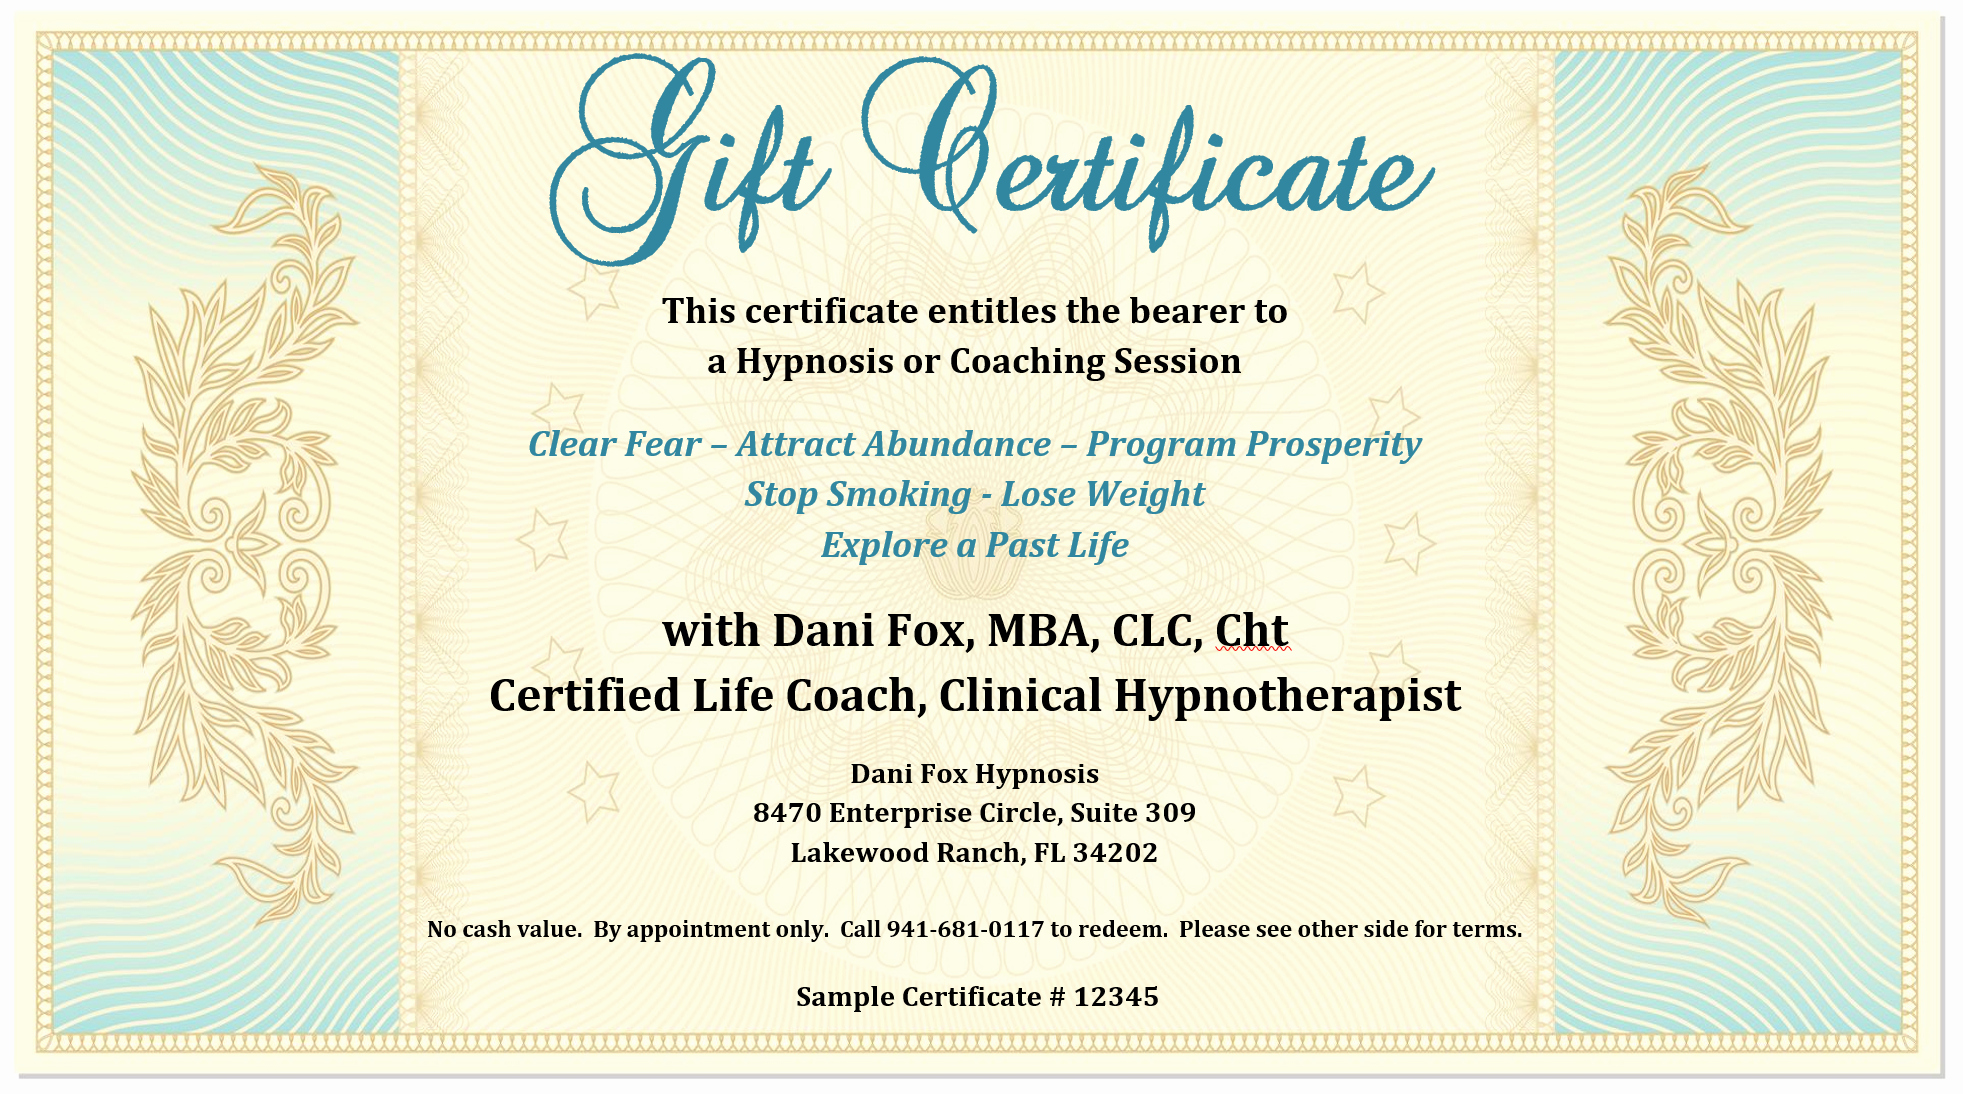 This Entitles the Bearer to Template Certificate Lovely Gift Certificate Dani Fox Hypnosis